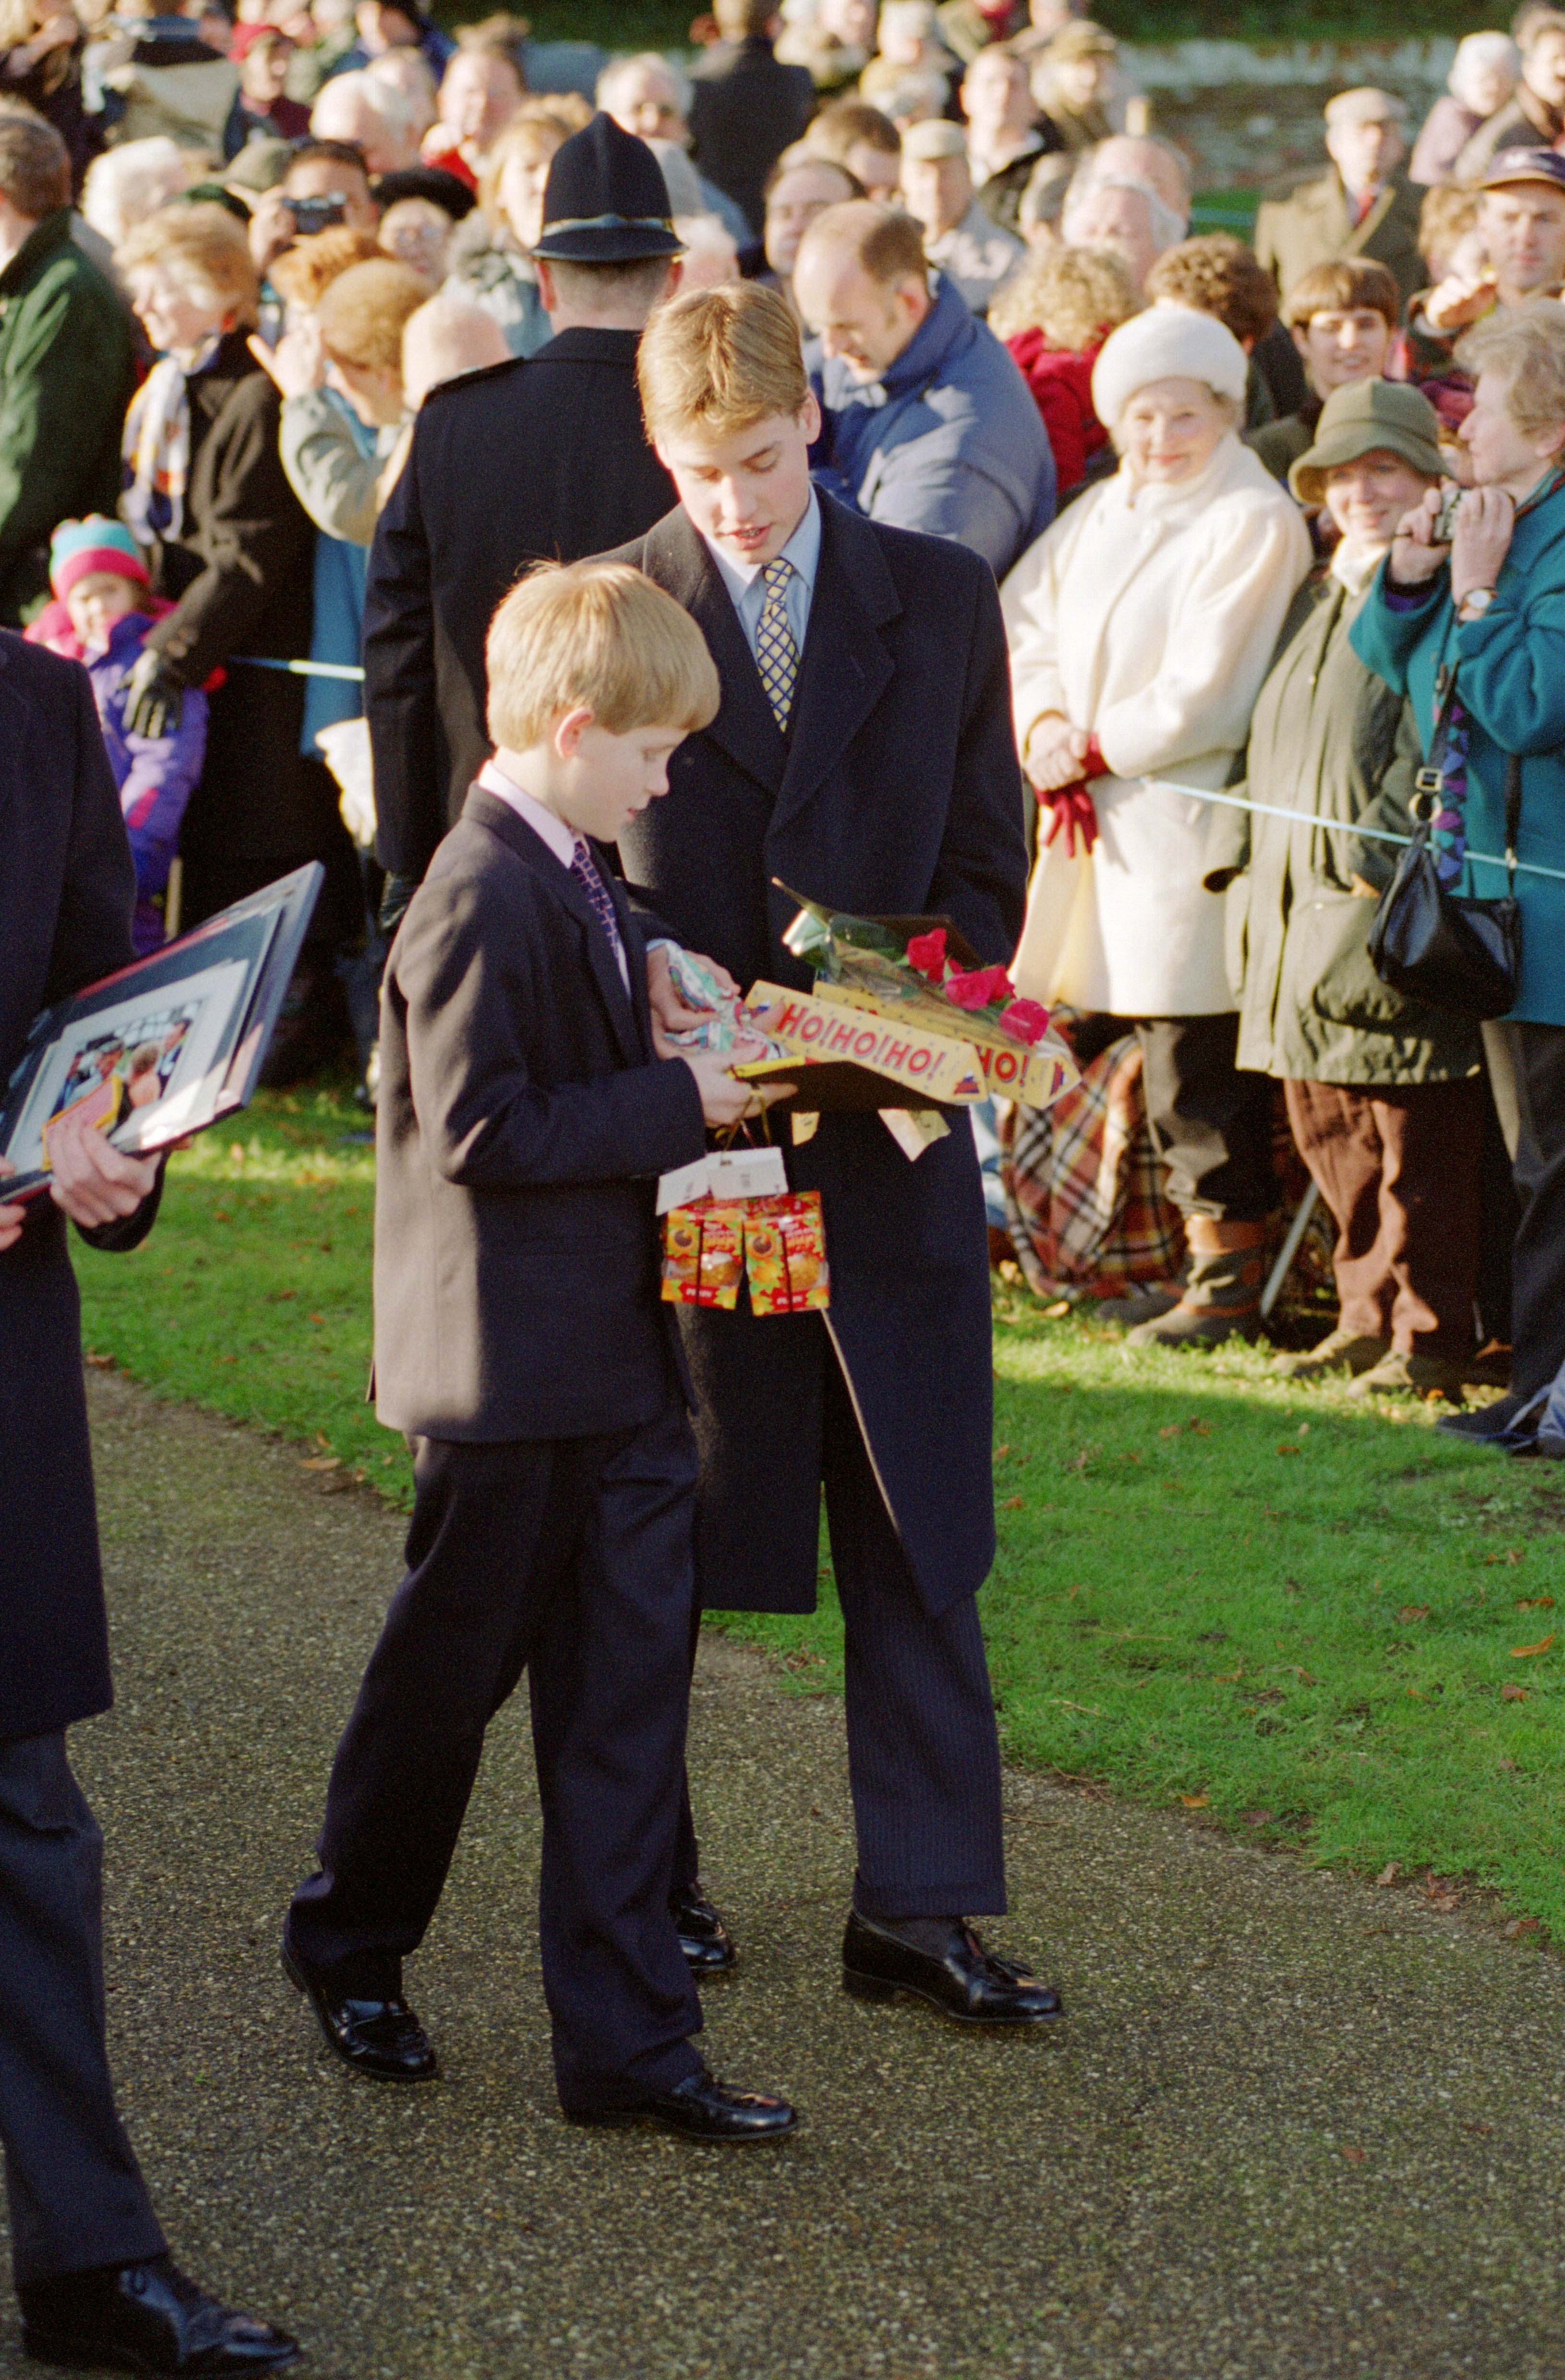 Prince William and Prince Harry pictured holding gifts at Sandringham Church on Christmas Day. / Source: Getty Images